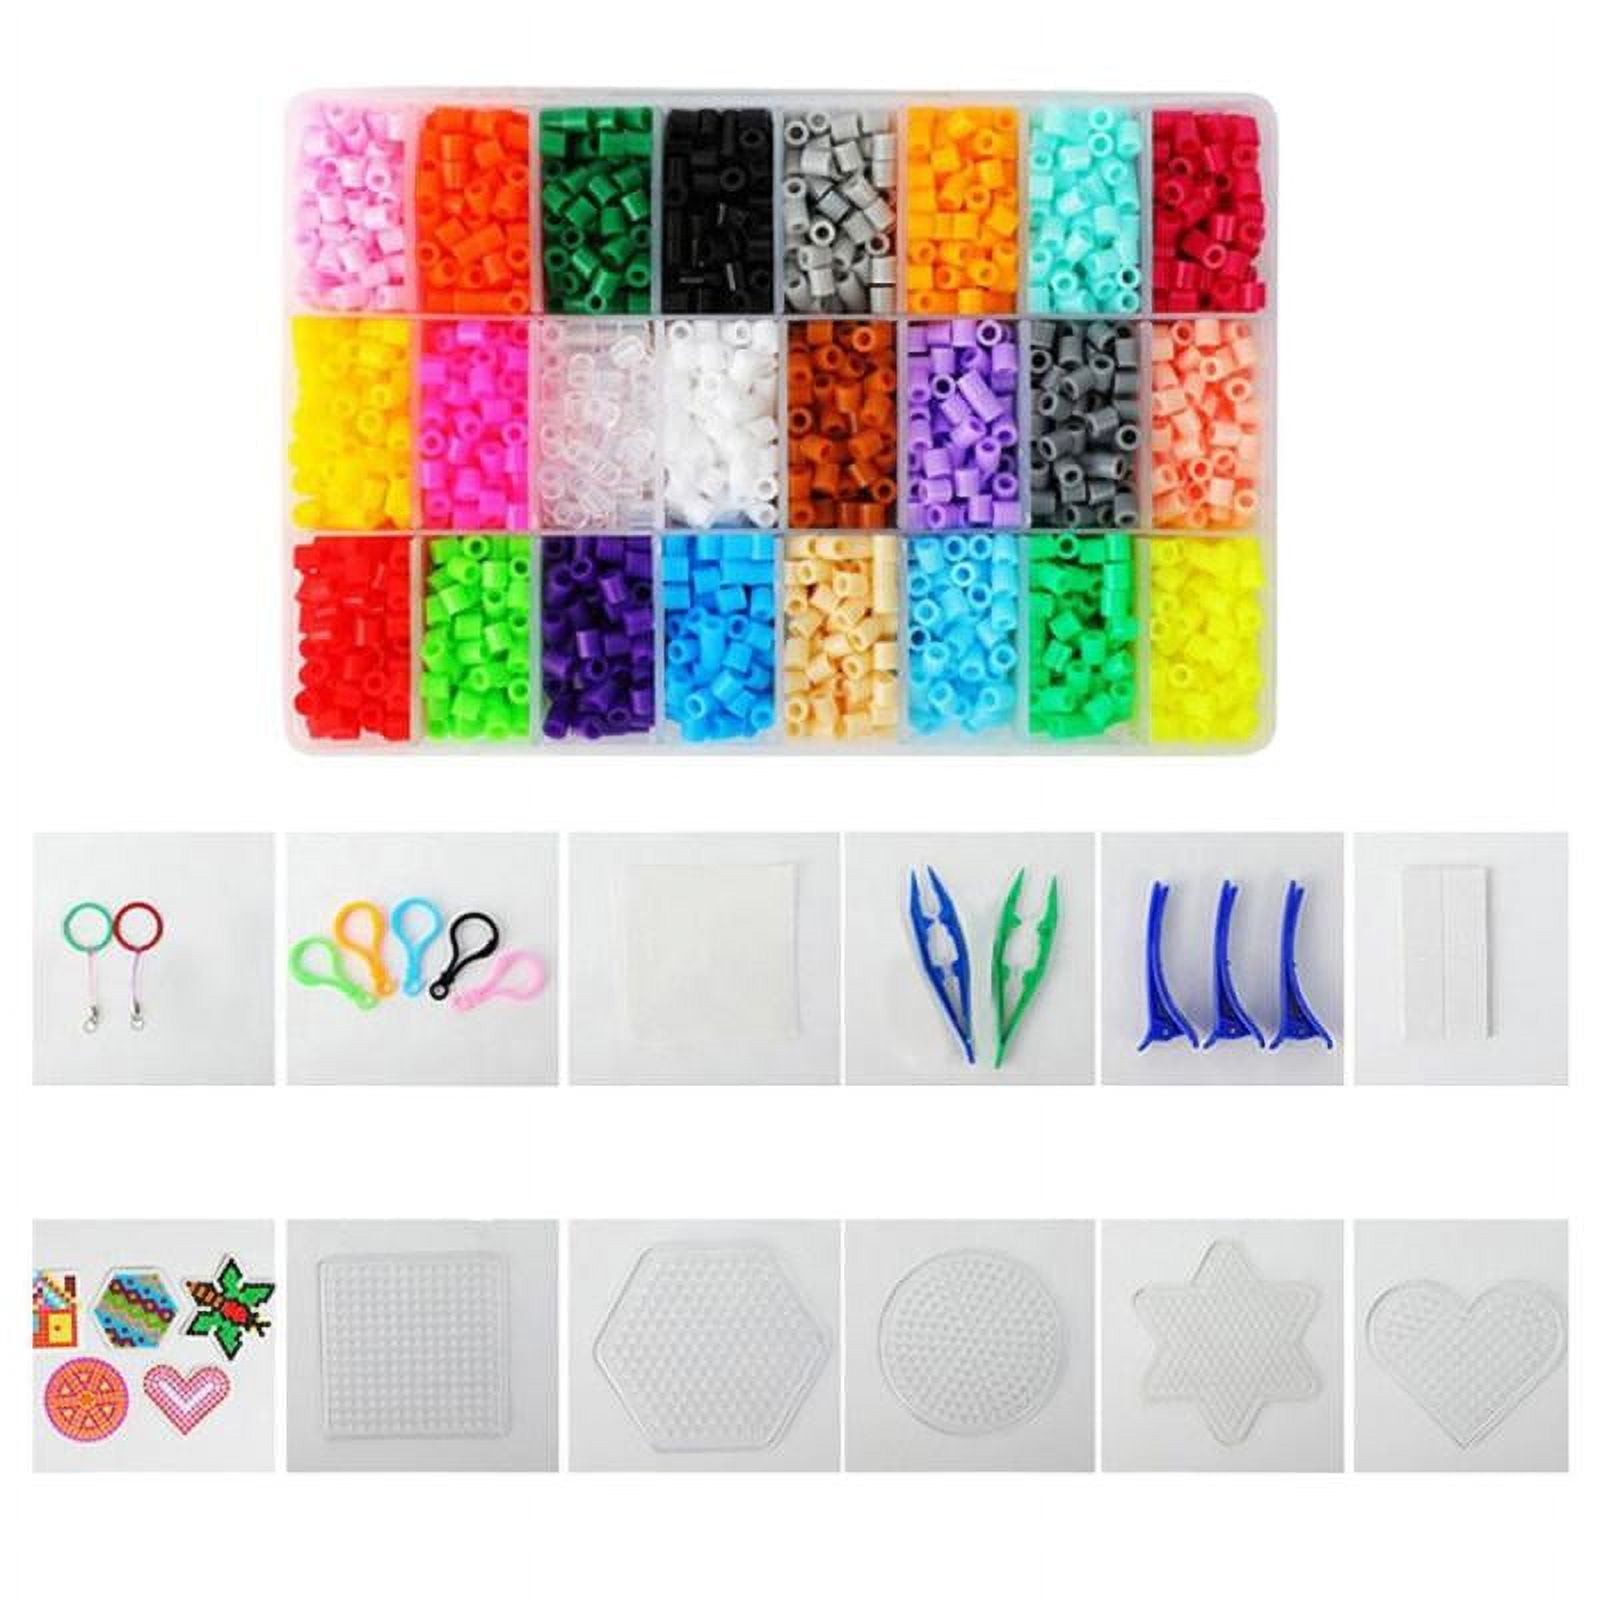 24 Colors Fuse Beads Kit, Fusion Hama Beads, Perler Beads, Ironing Paper  for Kids Crafts Beading Activity Puzzles Toys for Boys 